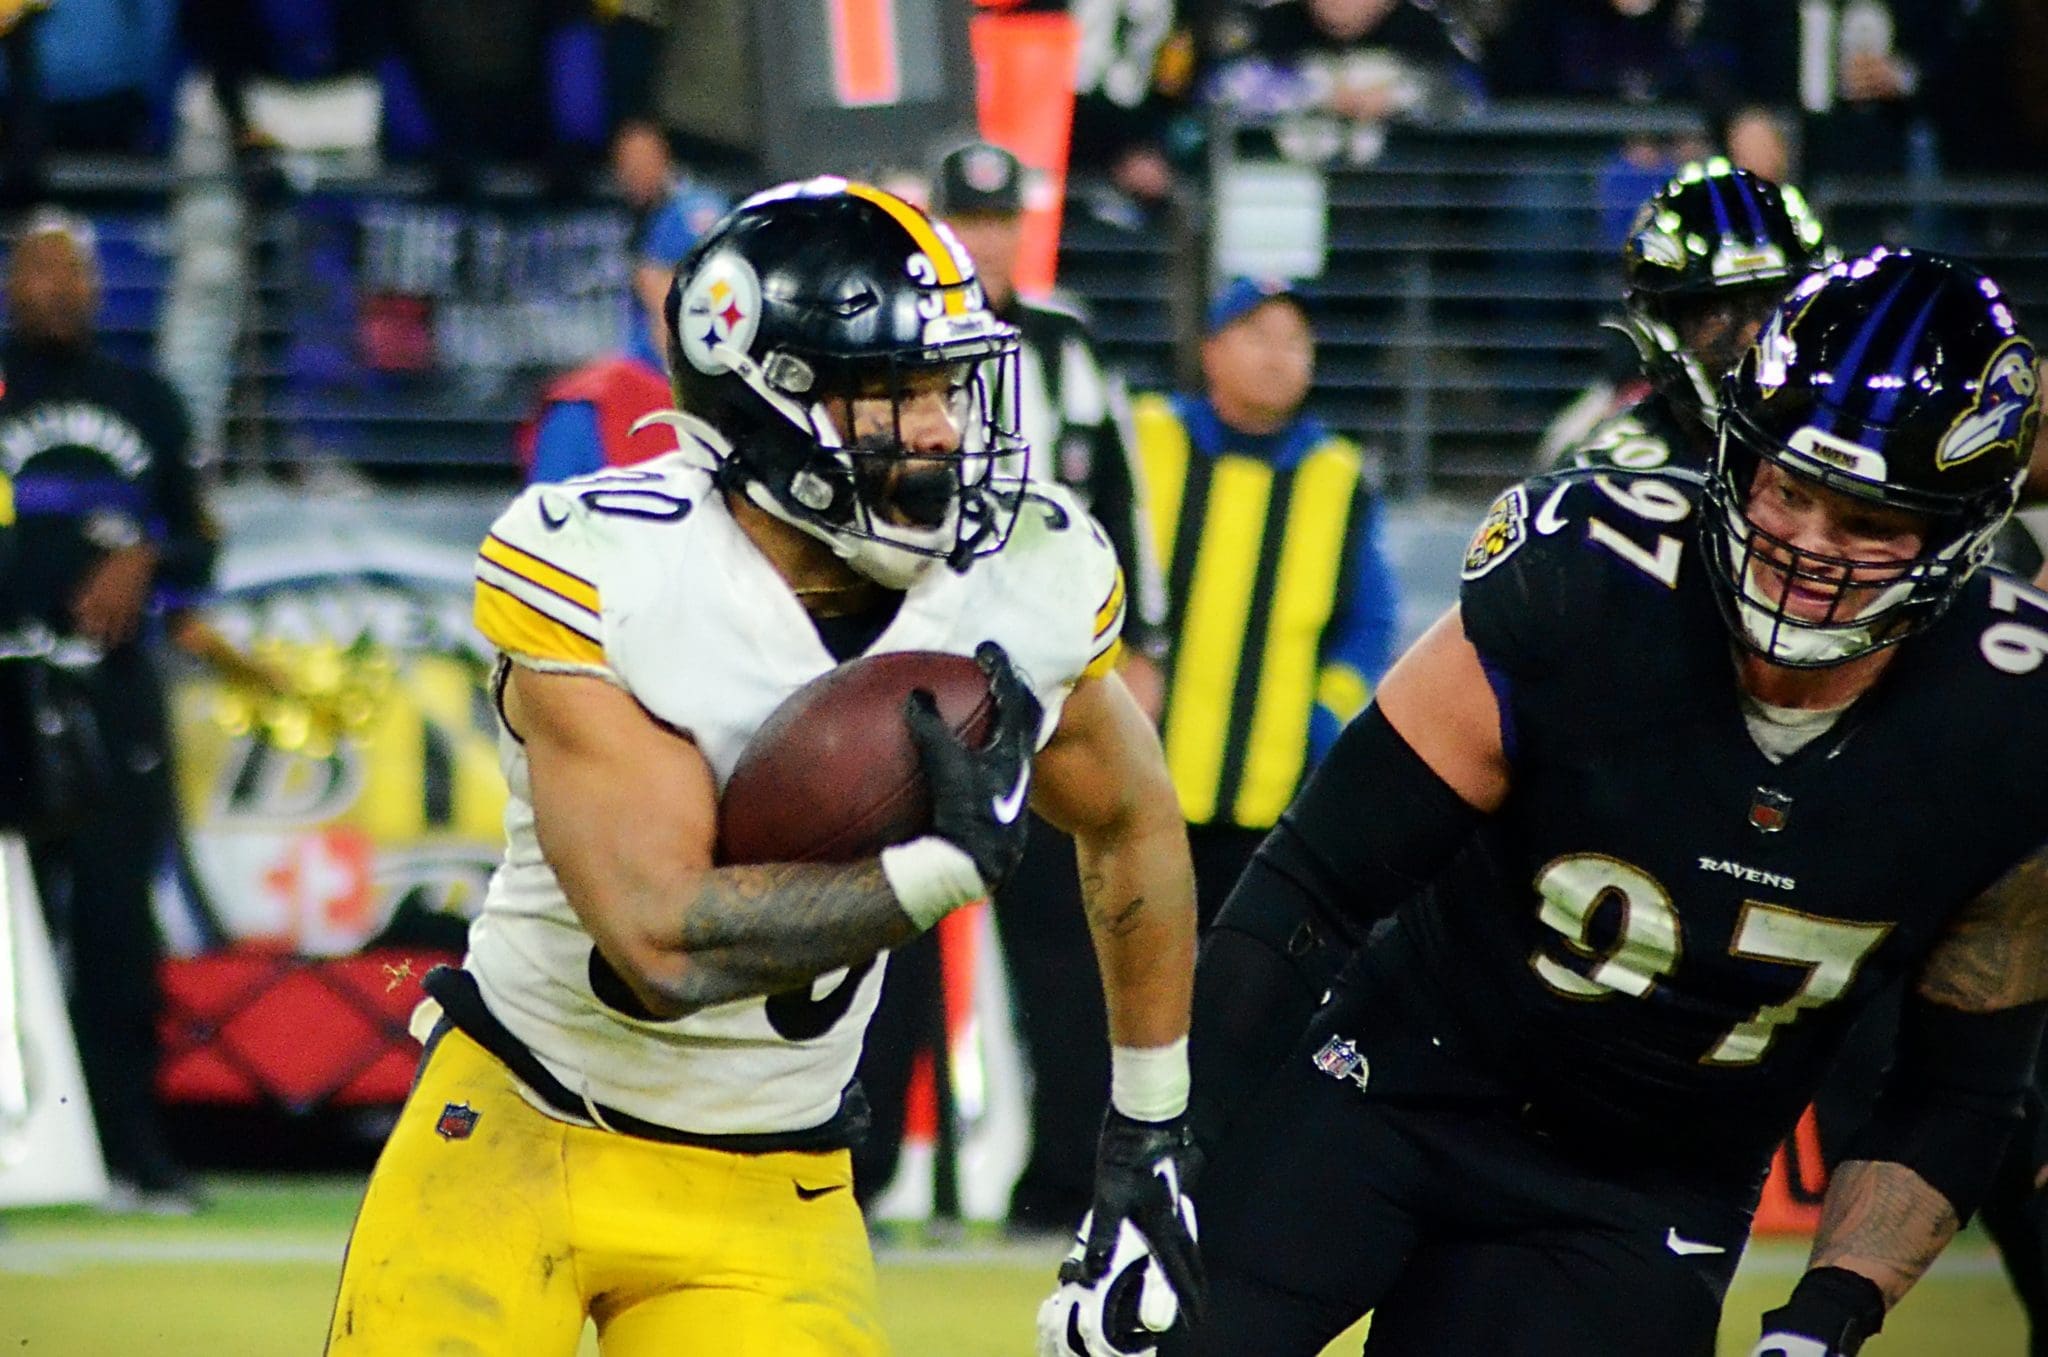 Jaylen Warren runs the ball as the Steelers face the Ravens on Jan. 1, 2022 in Baltimore. (Mitchell Northam / Steelers Now)